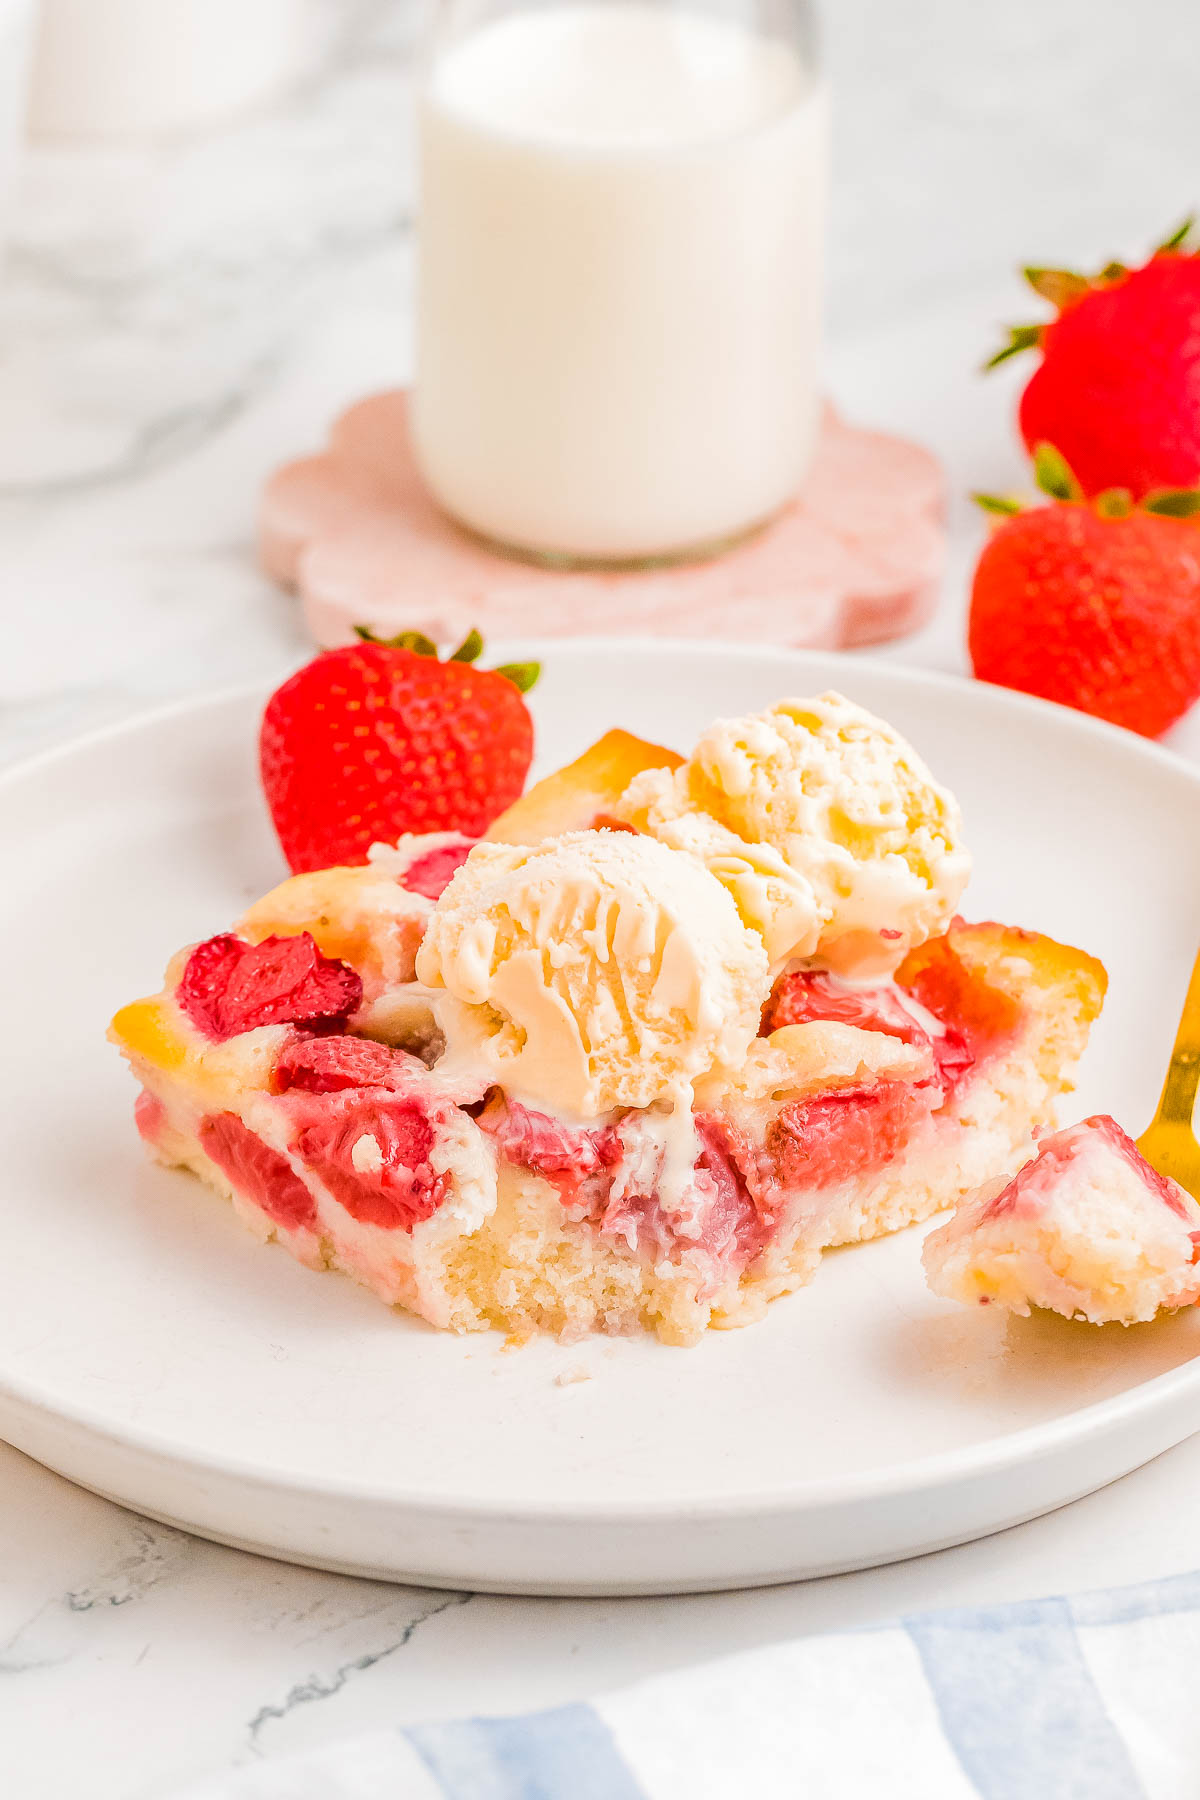 A slice of strawberry cobbler topped with vanilla ice cream on a white plate, accompanied by fresh strawberries and a glass of milk in the background.